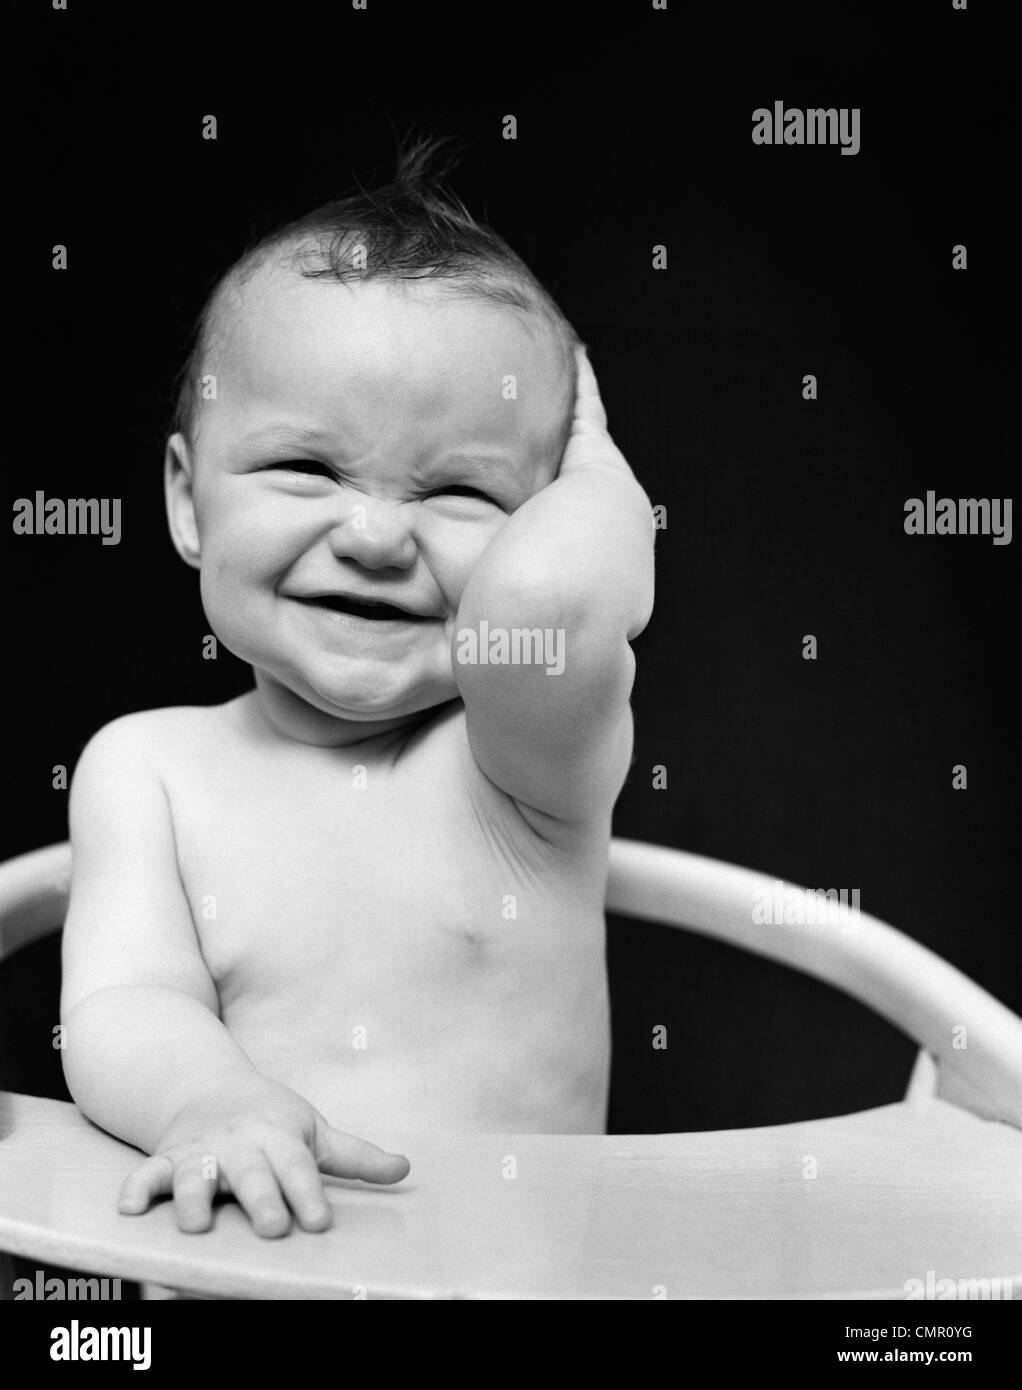 1940s PORTRAIT OF BABY SMILING HOLDING HAND TO SIDE OF HEAD Stock Photo